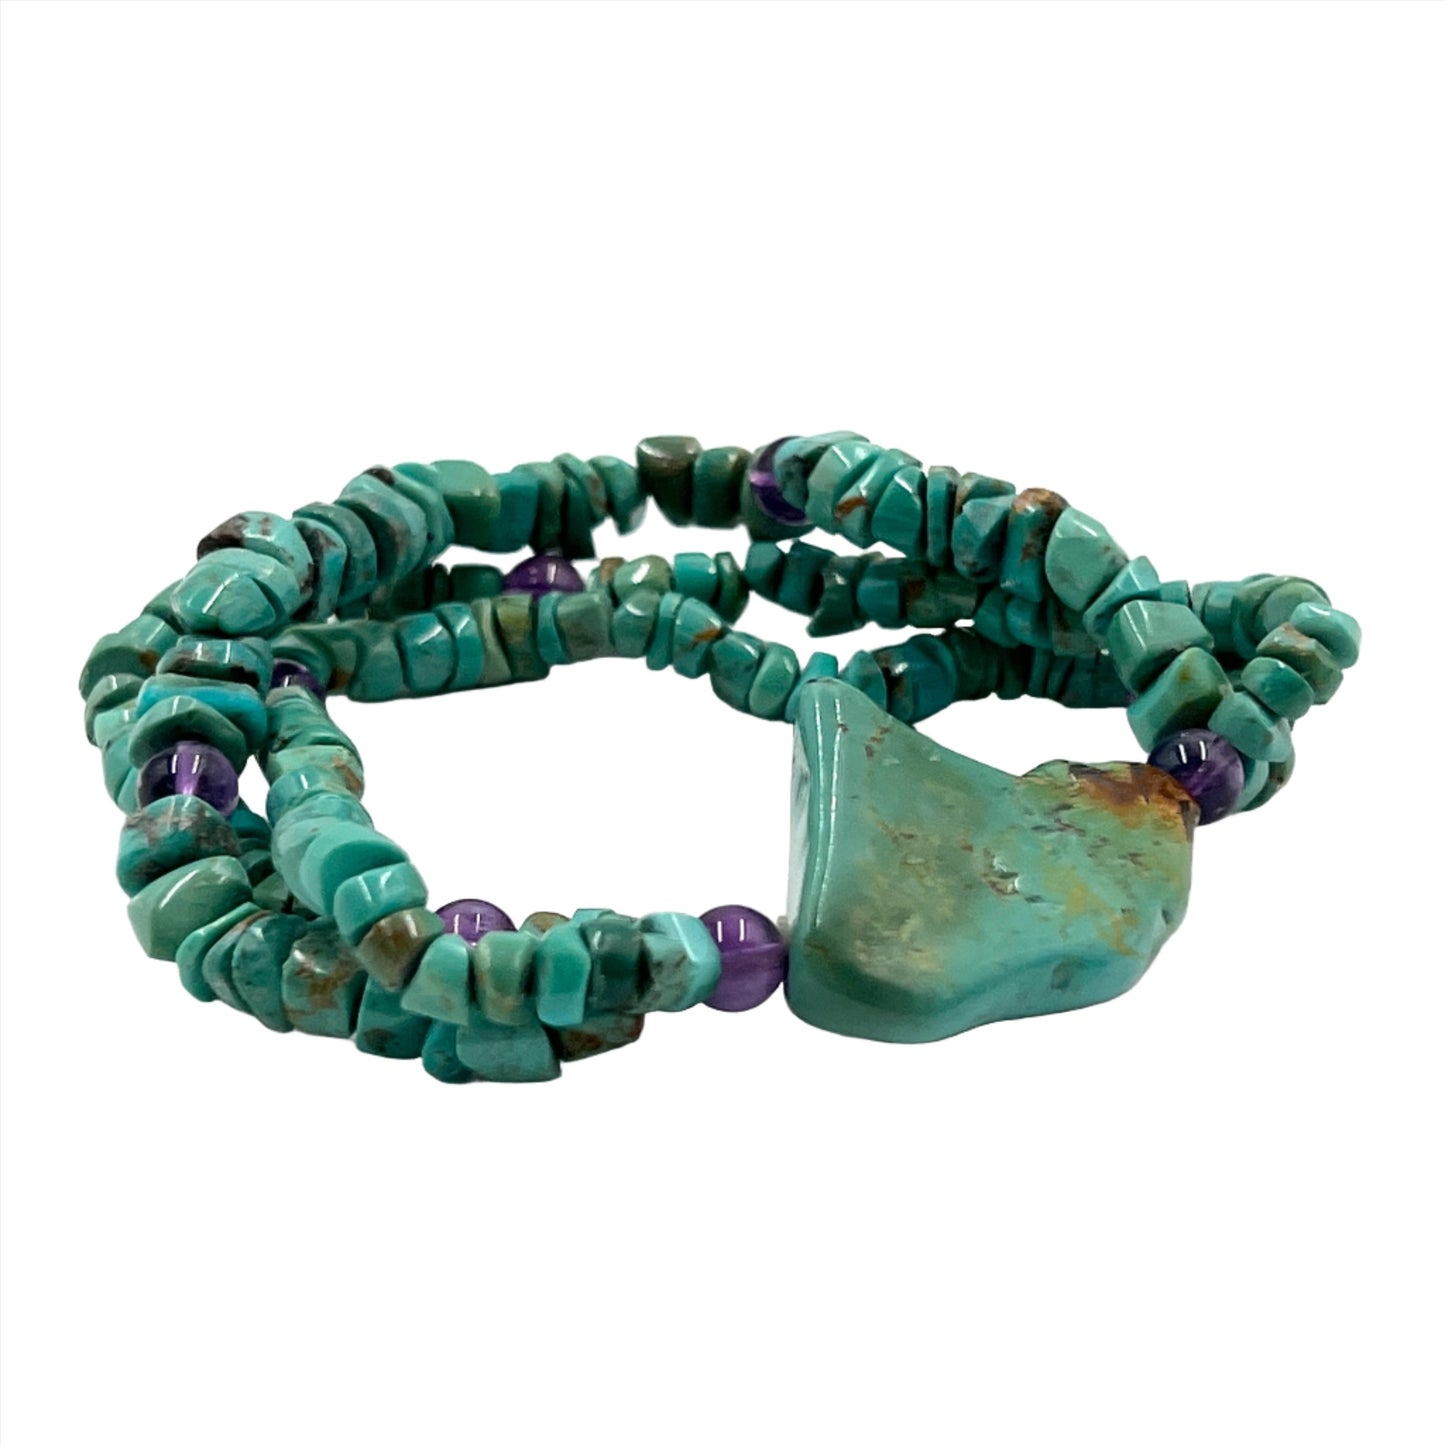 Turquoise Three strand Bracelets with Amethyst